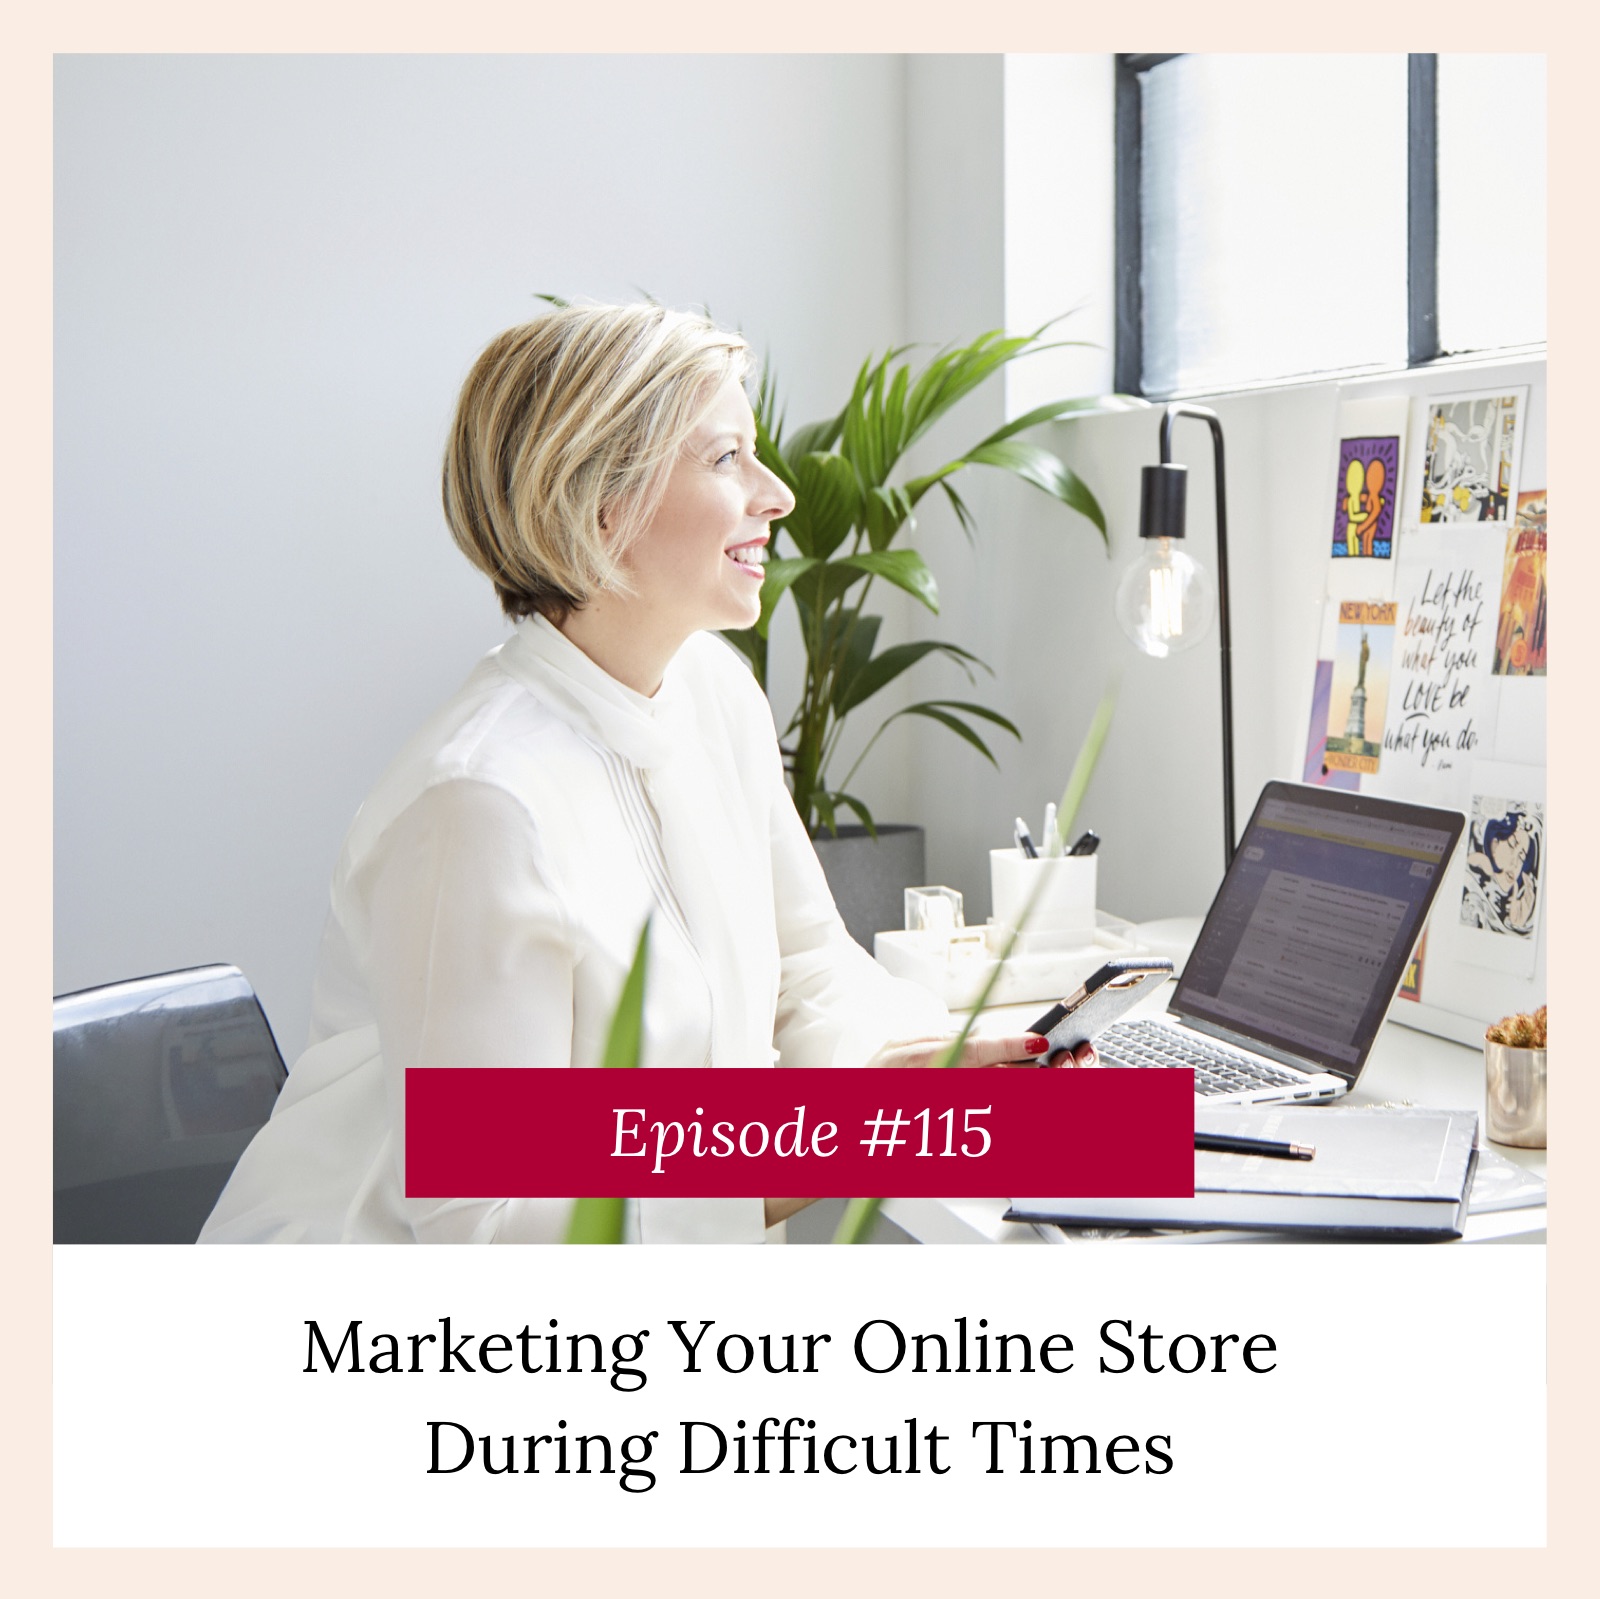 How to market your business during difficult times